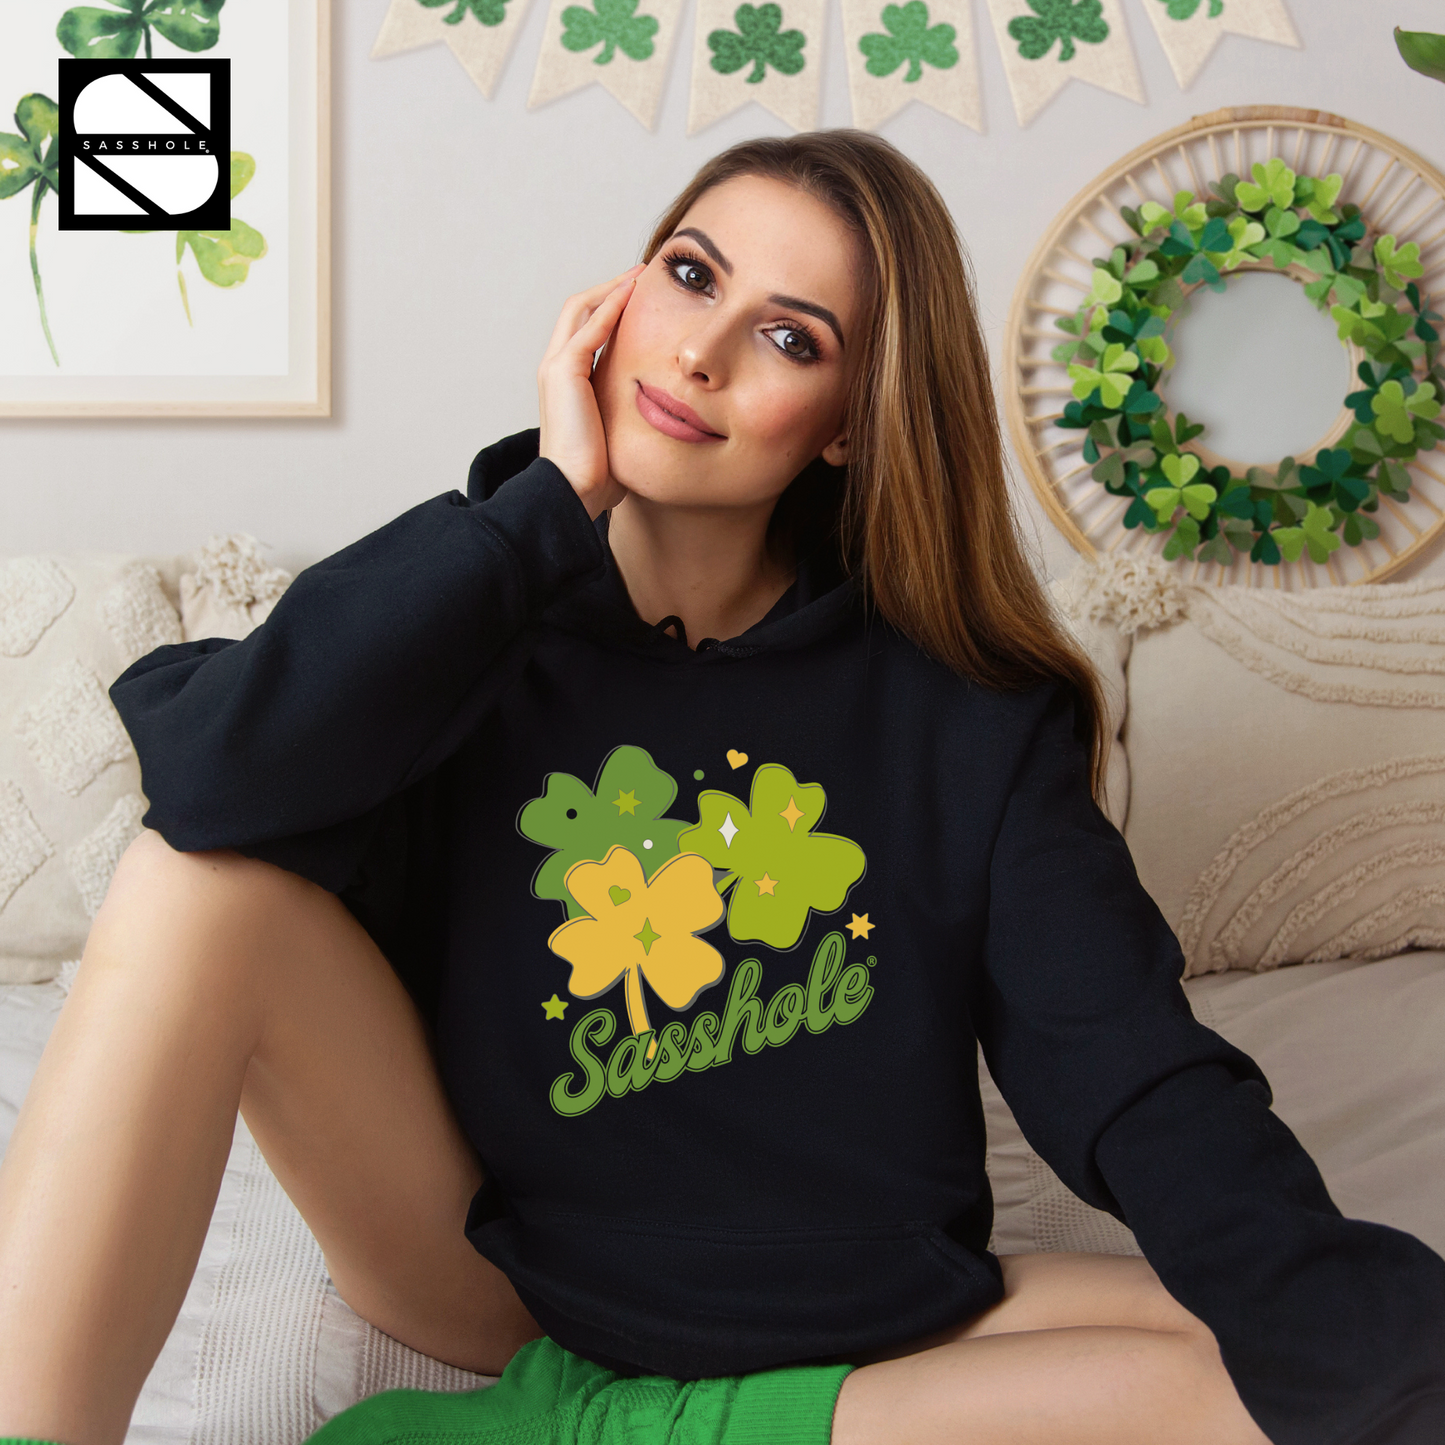 Women's St. Patrick's Day Hoodie, Women's Lucky Charm Tee, Women's Green and Cute Shirt, Women's Festive Green Hoodie, Women's Clothing, Women's Bold Green Attire, Unisex, Unique St. Patrick's Day Top, Unique St. Paddy's Day Hoodie, Trendy St. Paddy's Day Outfit, Trendy Irish Statement Wear, St. Patrick's Day Vibe Tee, St. Patrick's Day Shirt for Women, St. Patrick's Day Chic Fashion, St. Paddy's Day Swagger Wear, St. Paddy's Day Statement Wear, St. Paddy's Day Fun Tee, Shamrock Sass Style